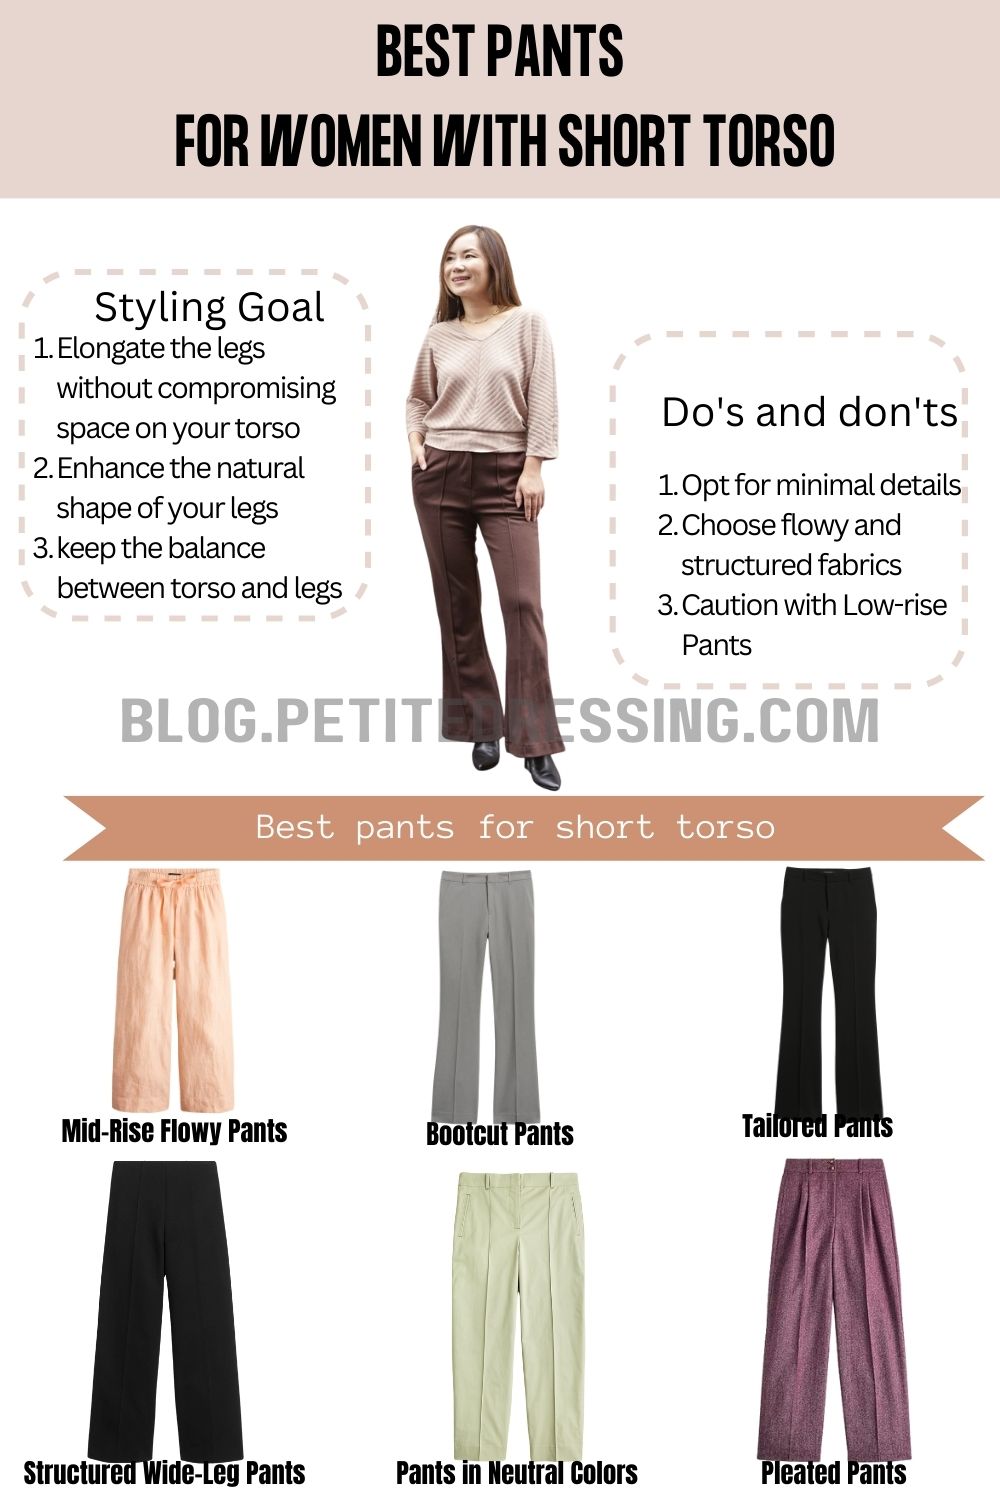 The Complete Pants Guide for Women with Short Torso - Petite Dressing